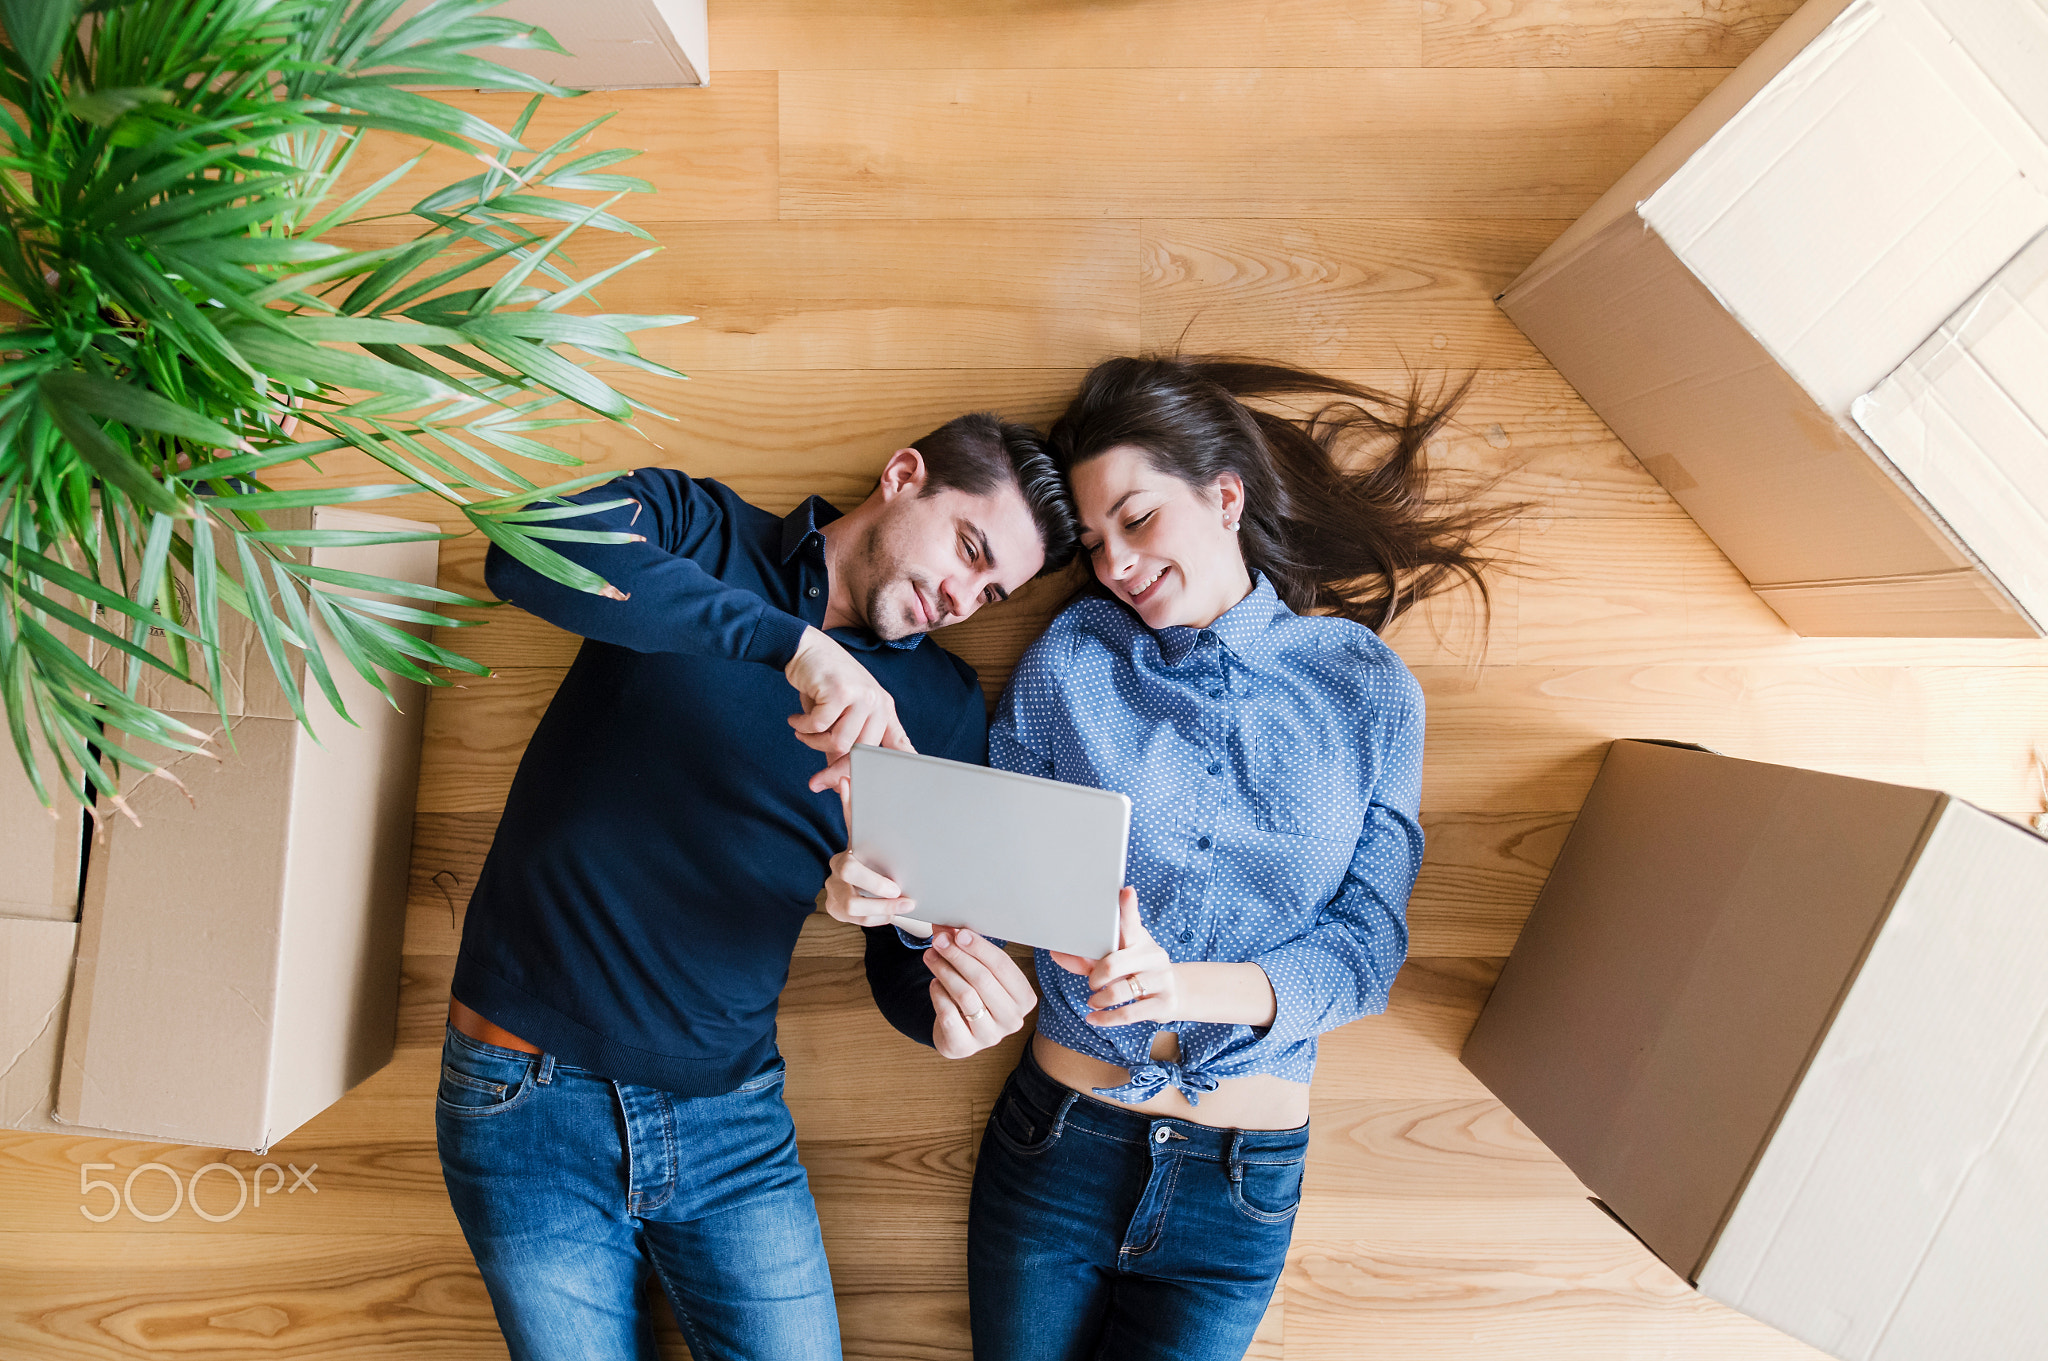 A top view of young couple with tablet and cardboard boxes moving in a new home.